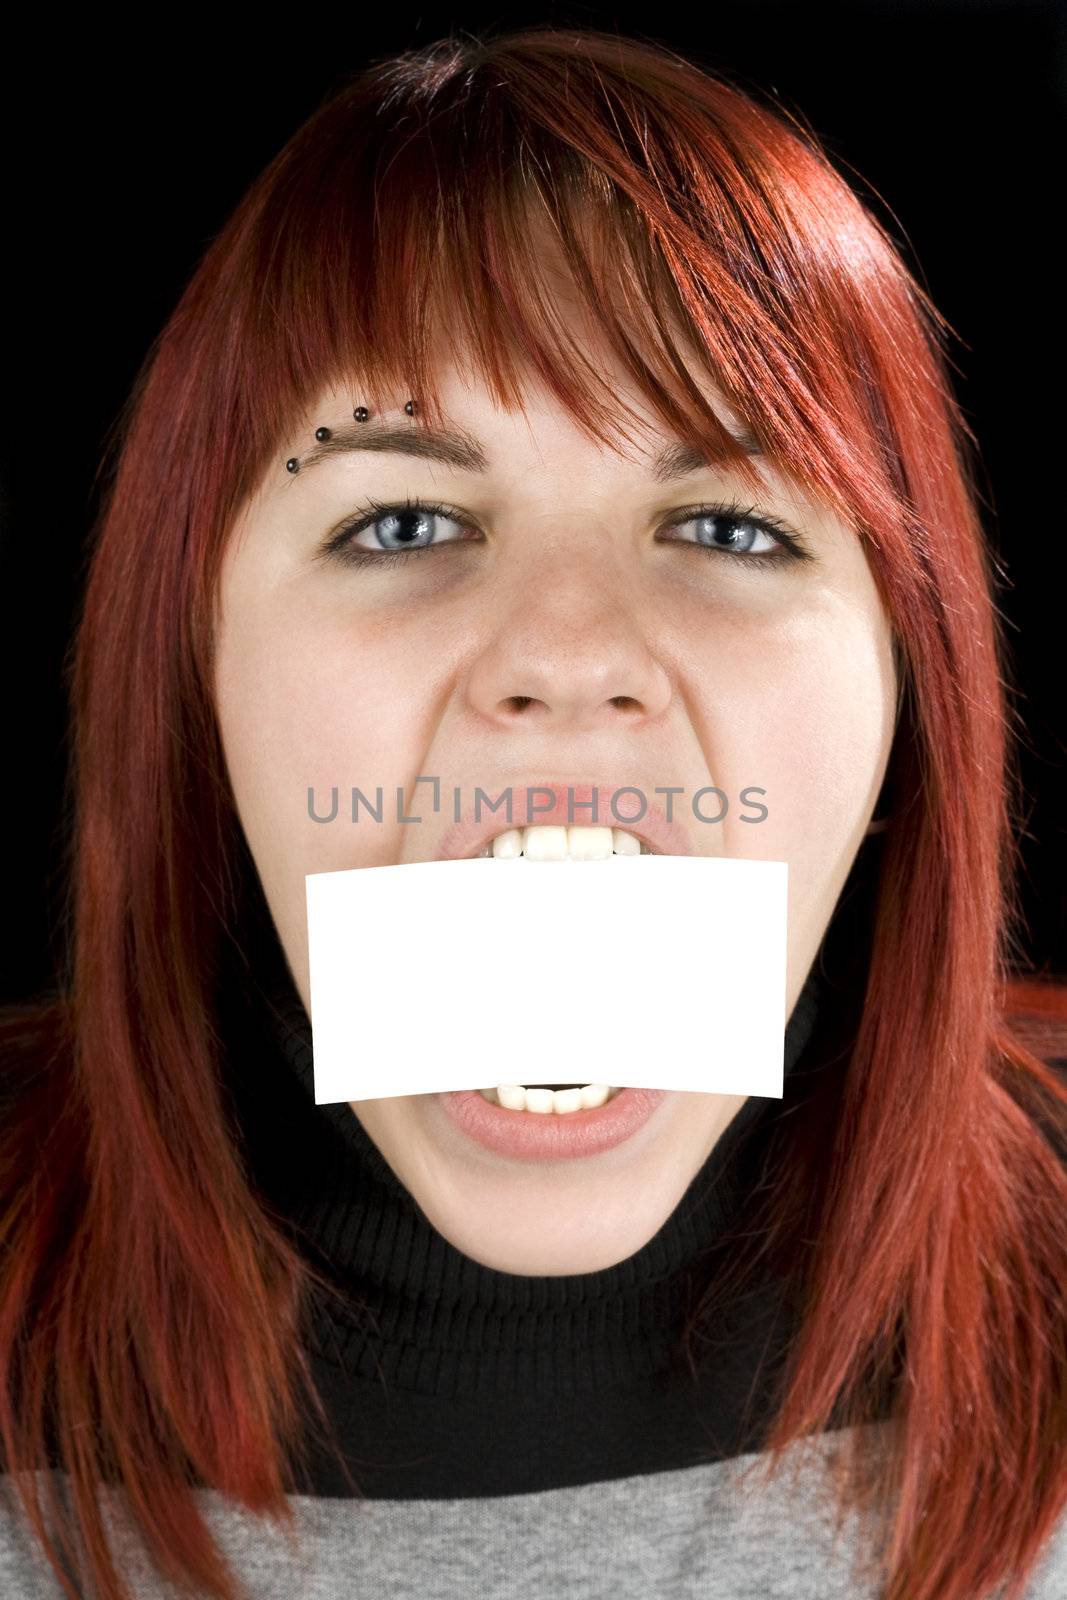 Redhead girl aggressively biting or eating a blank greeting card. Concept expresses nutrition or eating disorder problems.

Studio shot.

Studio shot.